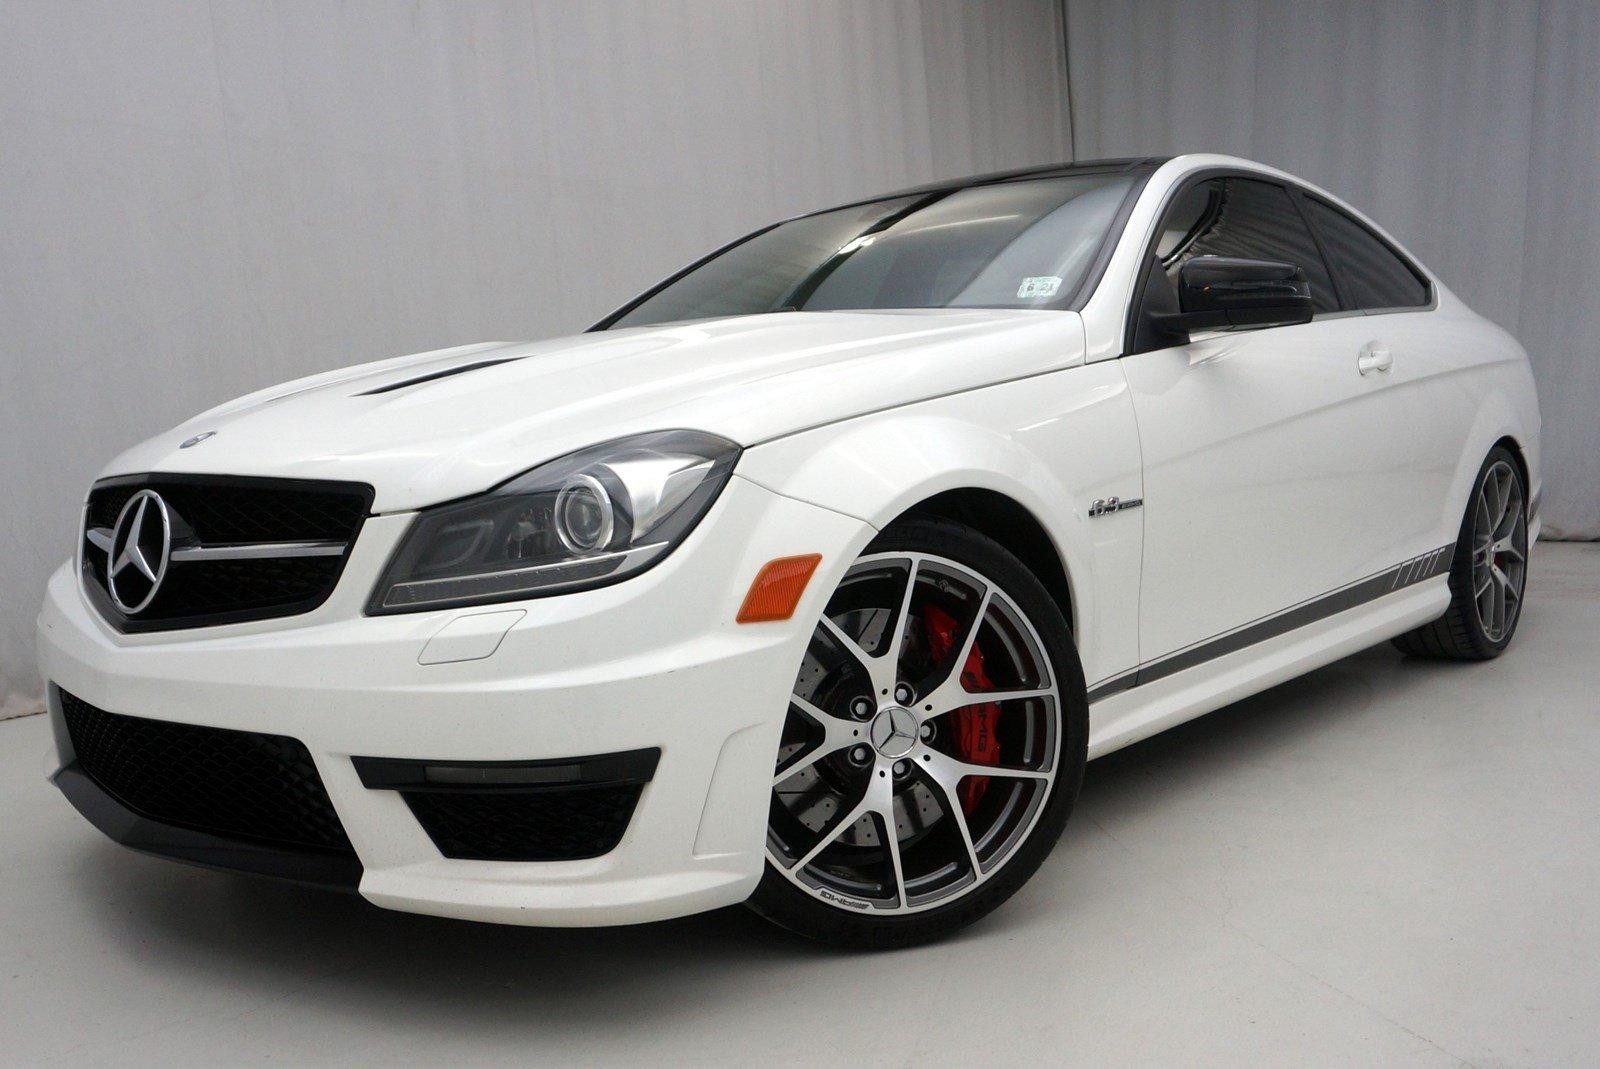 Used 15 Mercedes Benz C63 Amg Edition 507 For Sale Sold Eurocarscertified Com By Automobili Limited Stock G